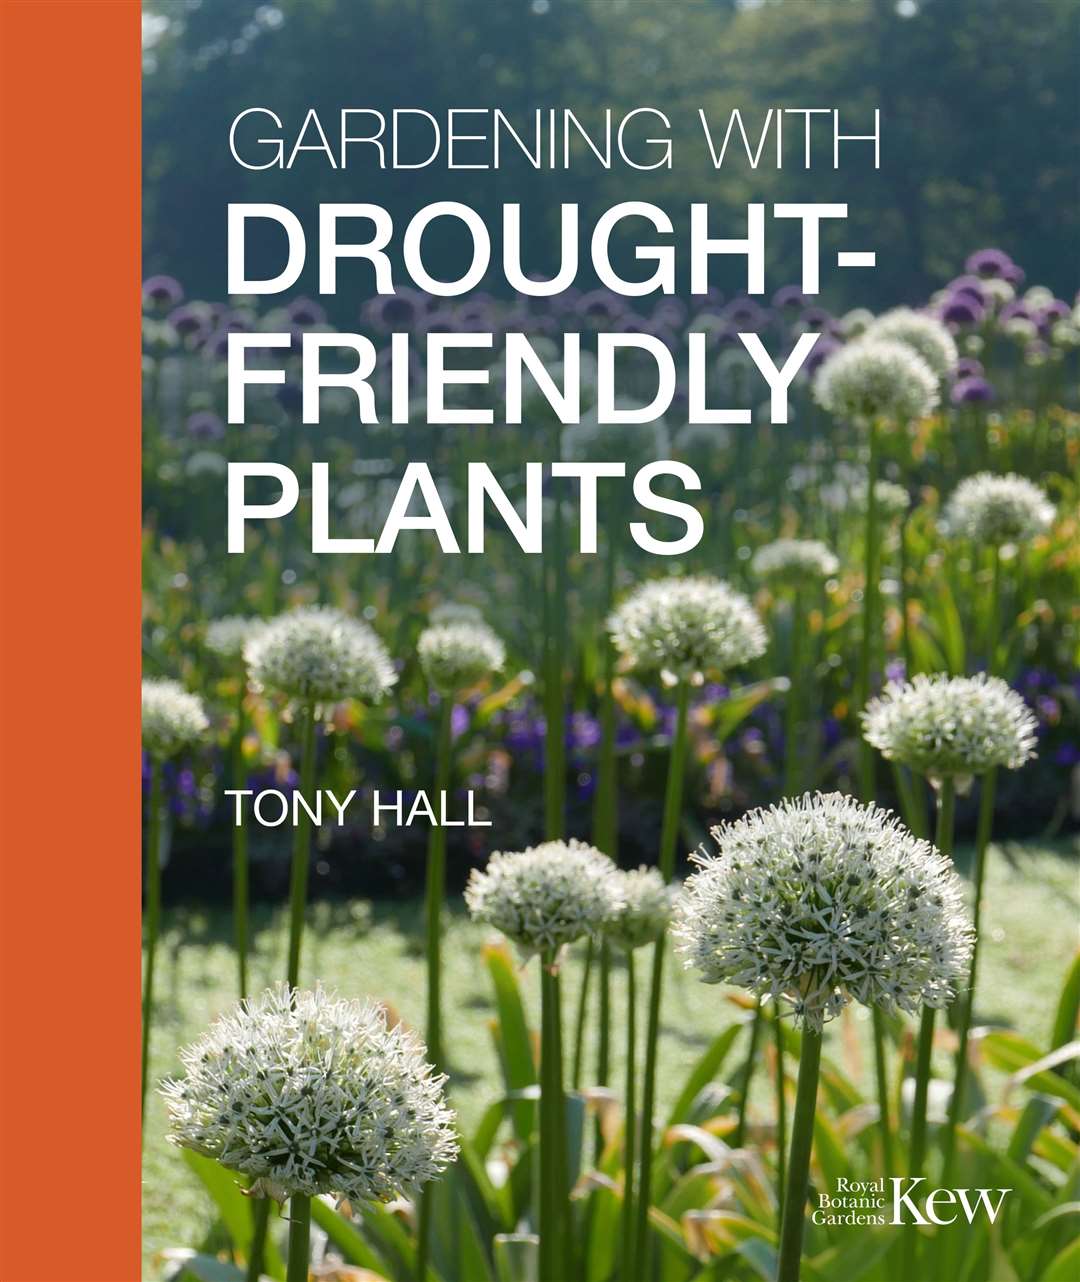 Gardening With Drought-Friendly Plants by Tony Hall.